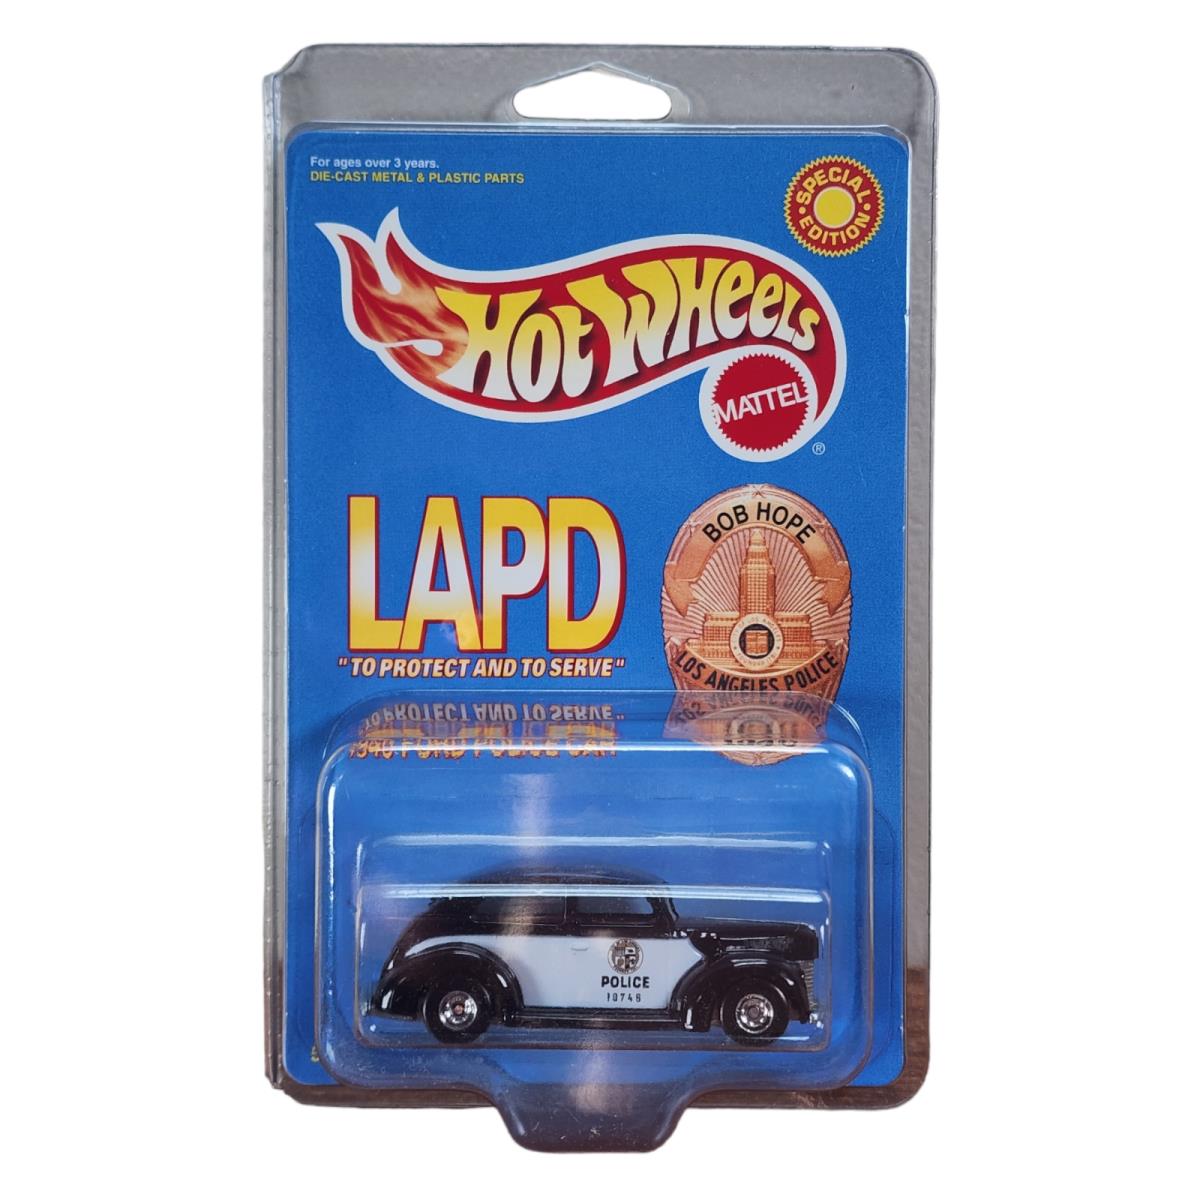 Lapd Hot Wheels 1940 Ford Police Car - Bob Hope Mint In Protective Case